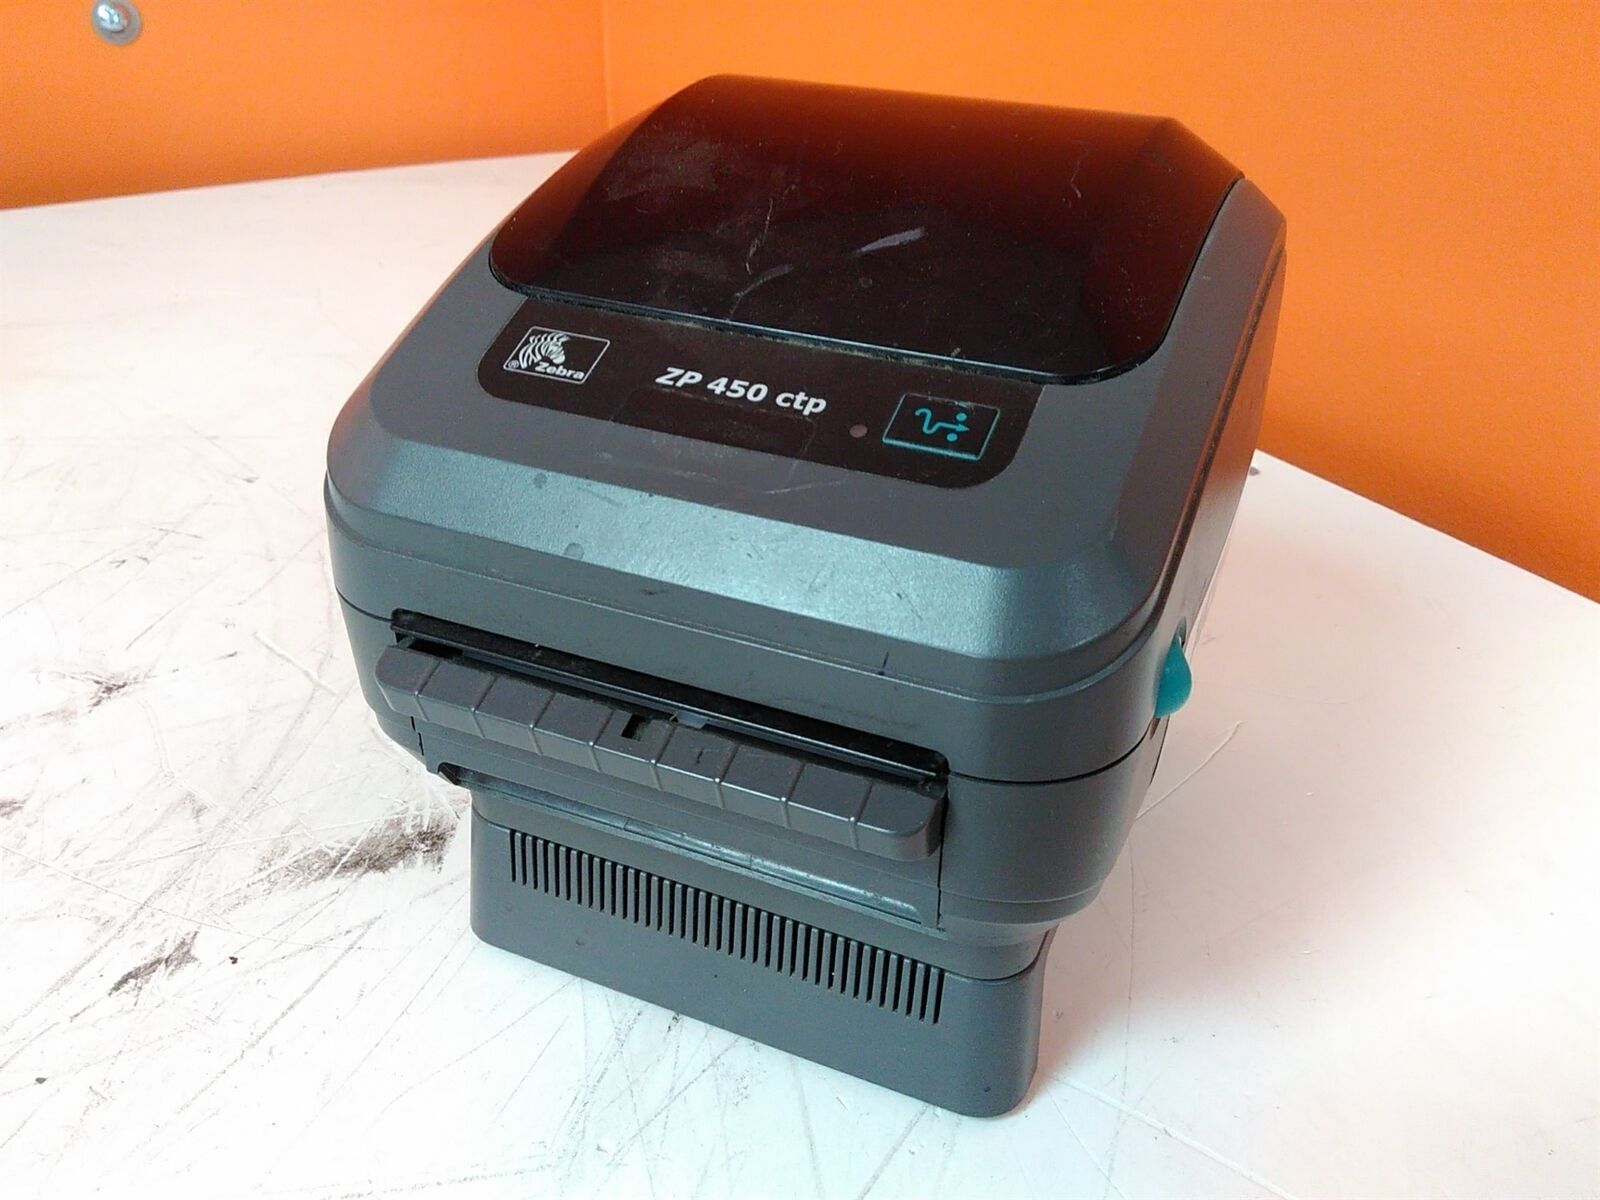 Defective Zebra ZP 450 ctp Thermal Label Printer Bad Printhead AS-IS